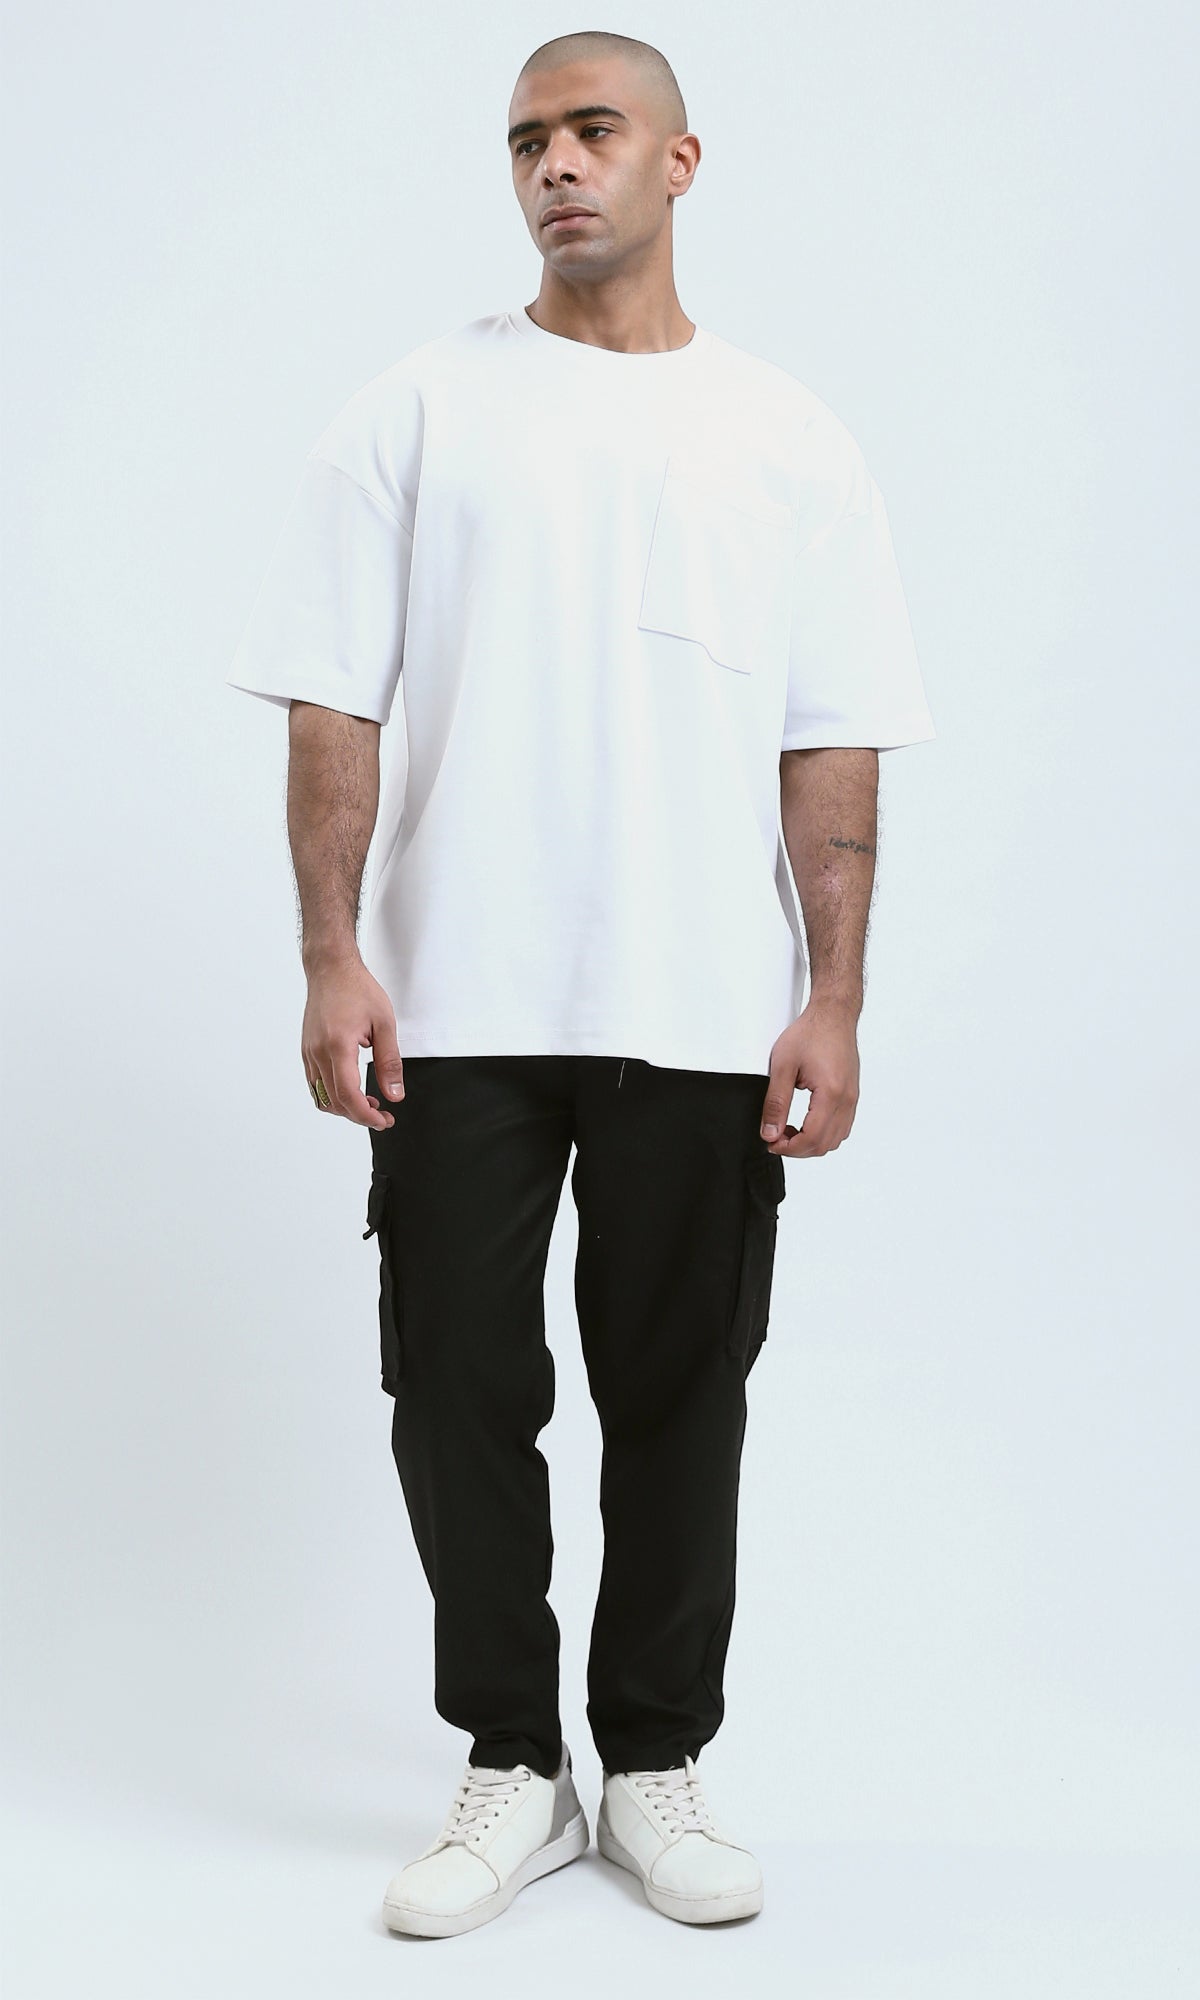 O190723 Elbow Sleeves White Tee With Side Pocket